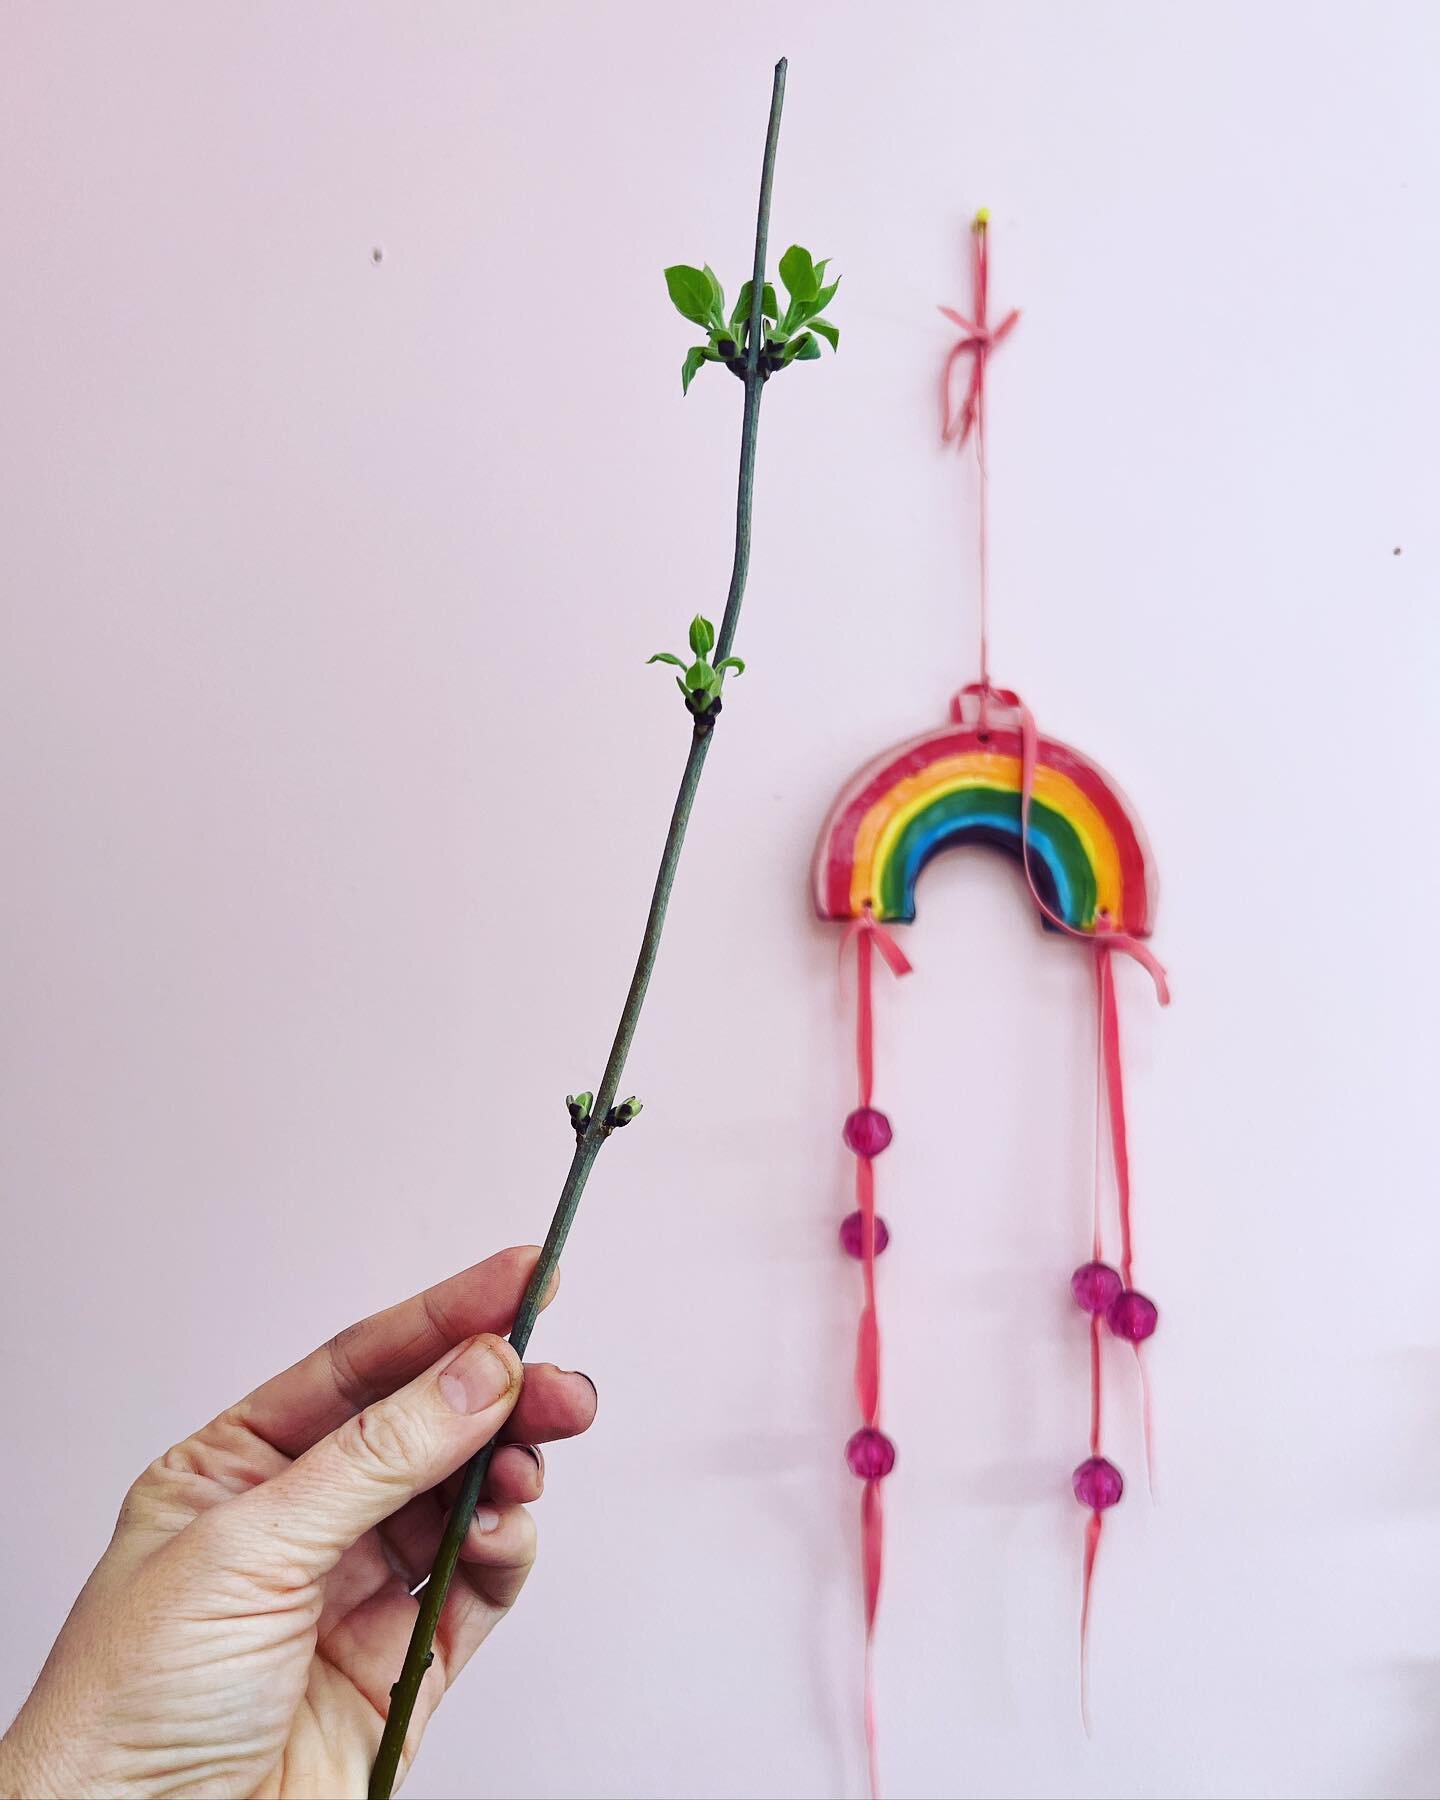 A lilac wand/a celebration of small wonders/ a sign of spring&hellip;
.
.
ID a white hand in left corner holds a small twig of lilac that is sprouting leaves. Background pale pink wall with ceramic wall hanging. 
#wand #queerwitch #rainbow #lilac #pr